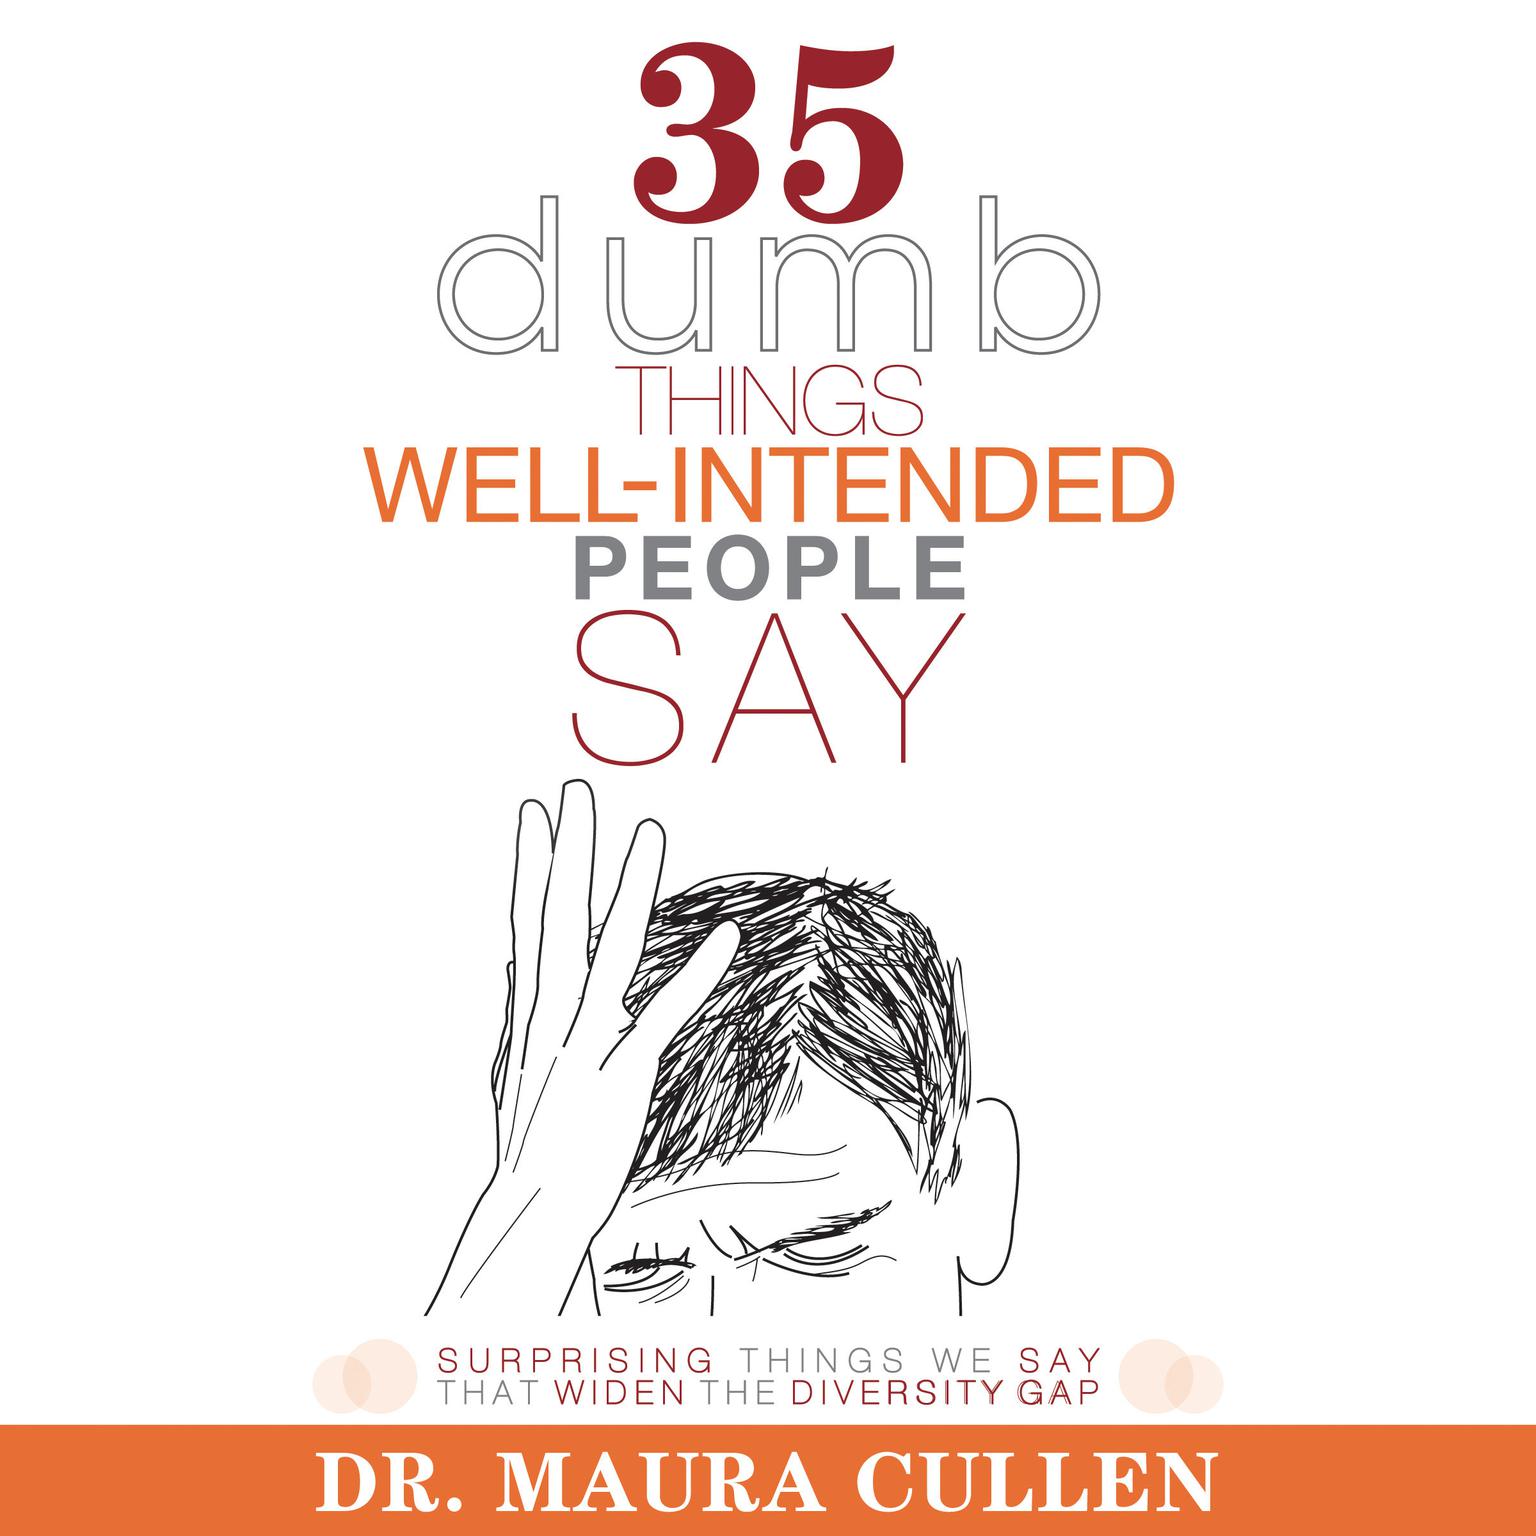 35 Dumb Things Well-Intended People Say: Surprising Things We Say That Widen the Diversity Gap Audiobook, by Maura Cullen